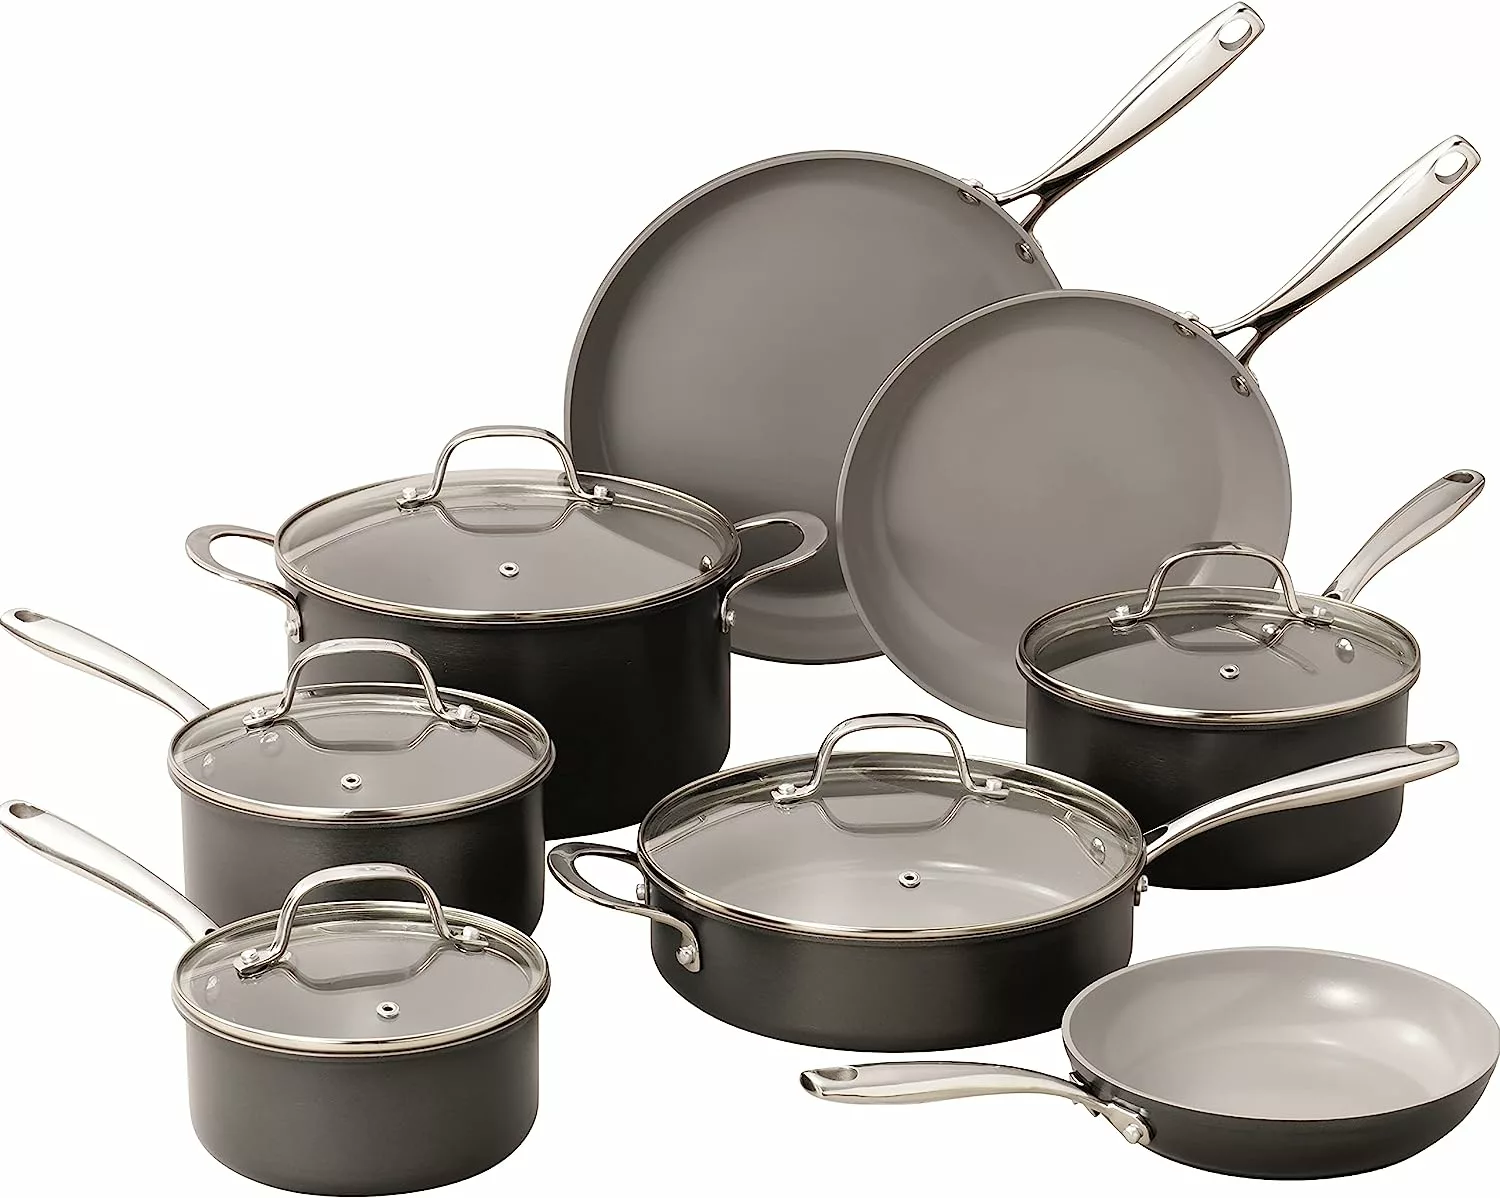  MICHELANGELO Hard Anodized Cookware Set, 10-Piece Pots and Pans  Set Nonstick with Granite Interior, Non Toxic Cookware Set Induction  Compatible, Nonstick Cookware Set Oven Safe: Home & Kitchen